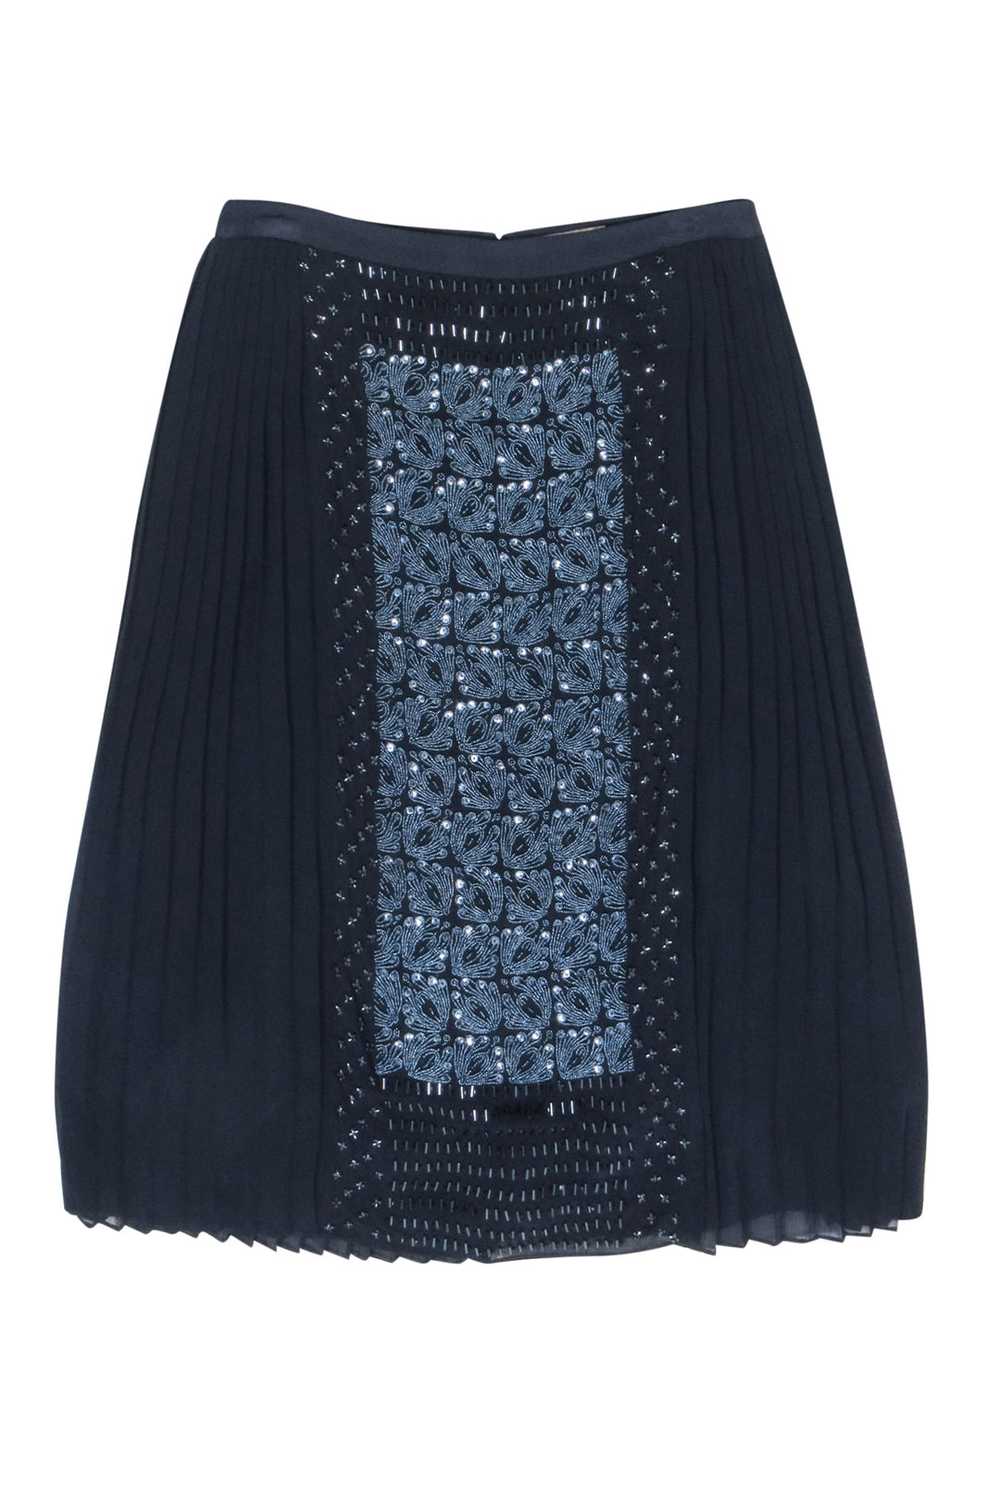 Tory Burch - Navy Silk Pleated Beaded Front Skirt… - image 1